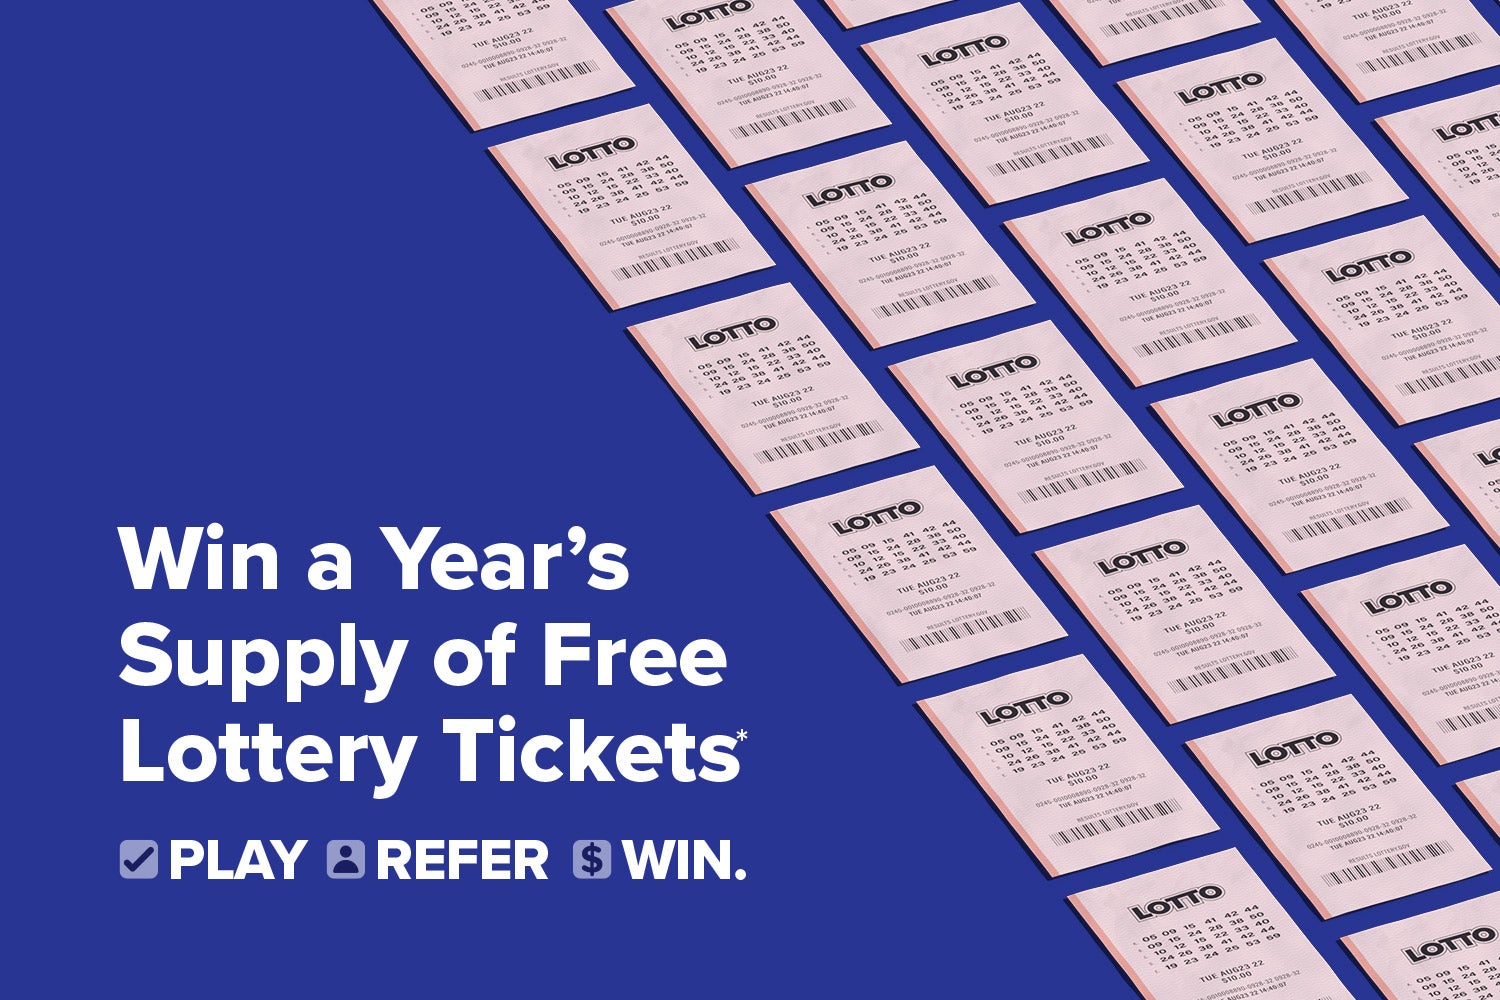 Win a Year's Supply of Free Lottery Tickets*